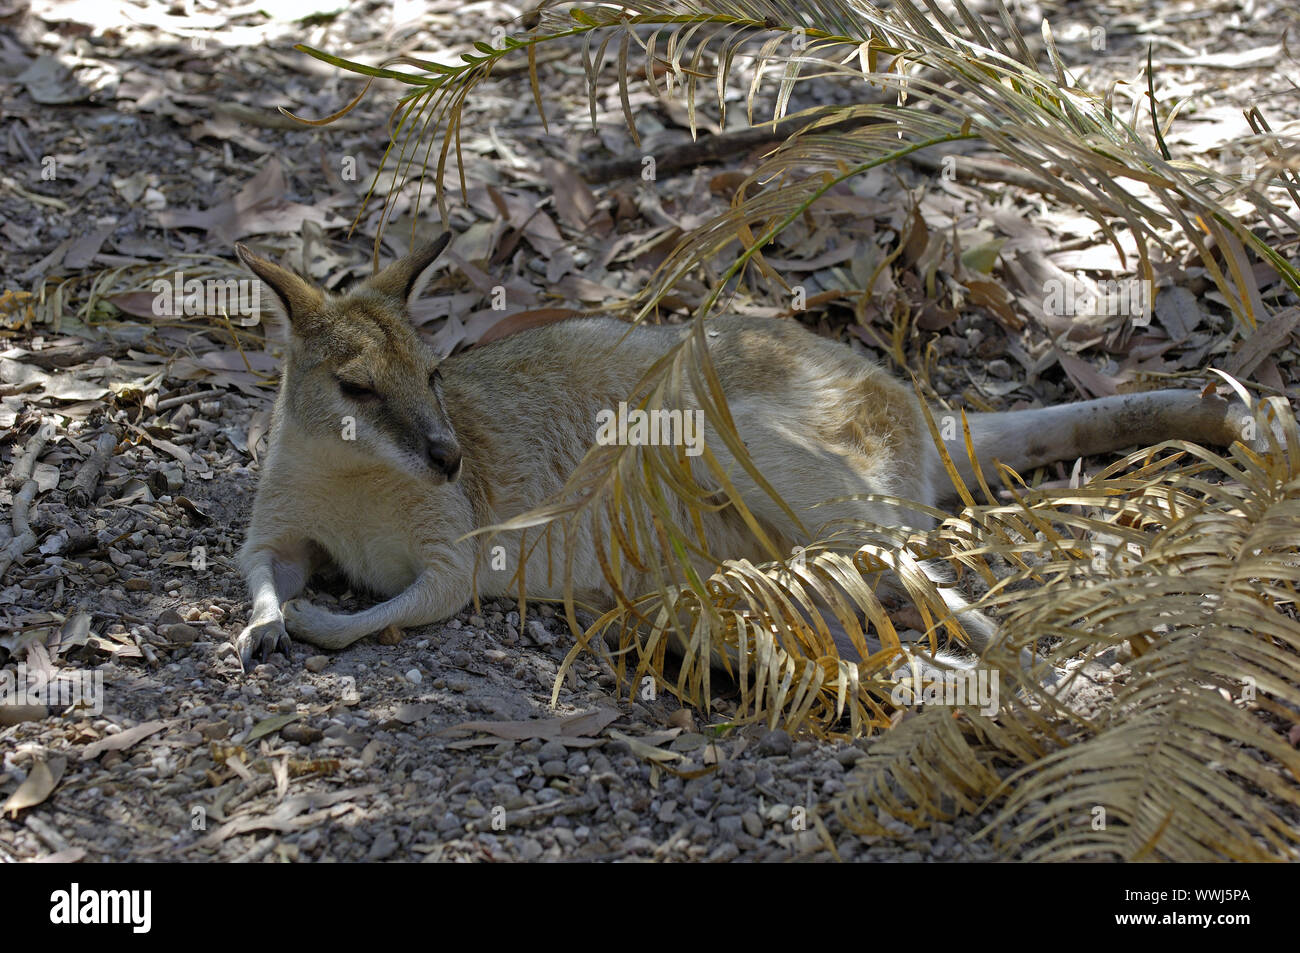 agile wallaby, sandy allaby, Litchfield NP, Northern Territory, Australia Stock Photo